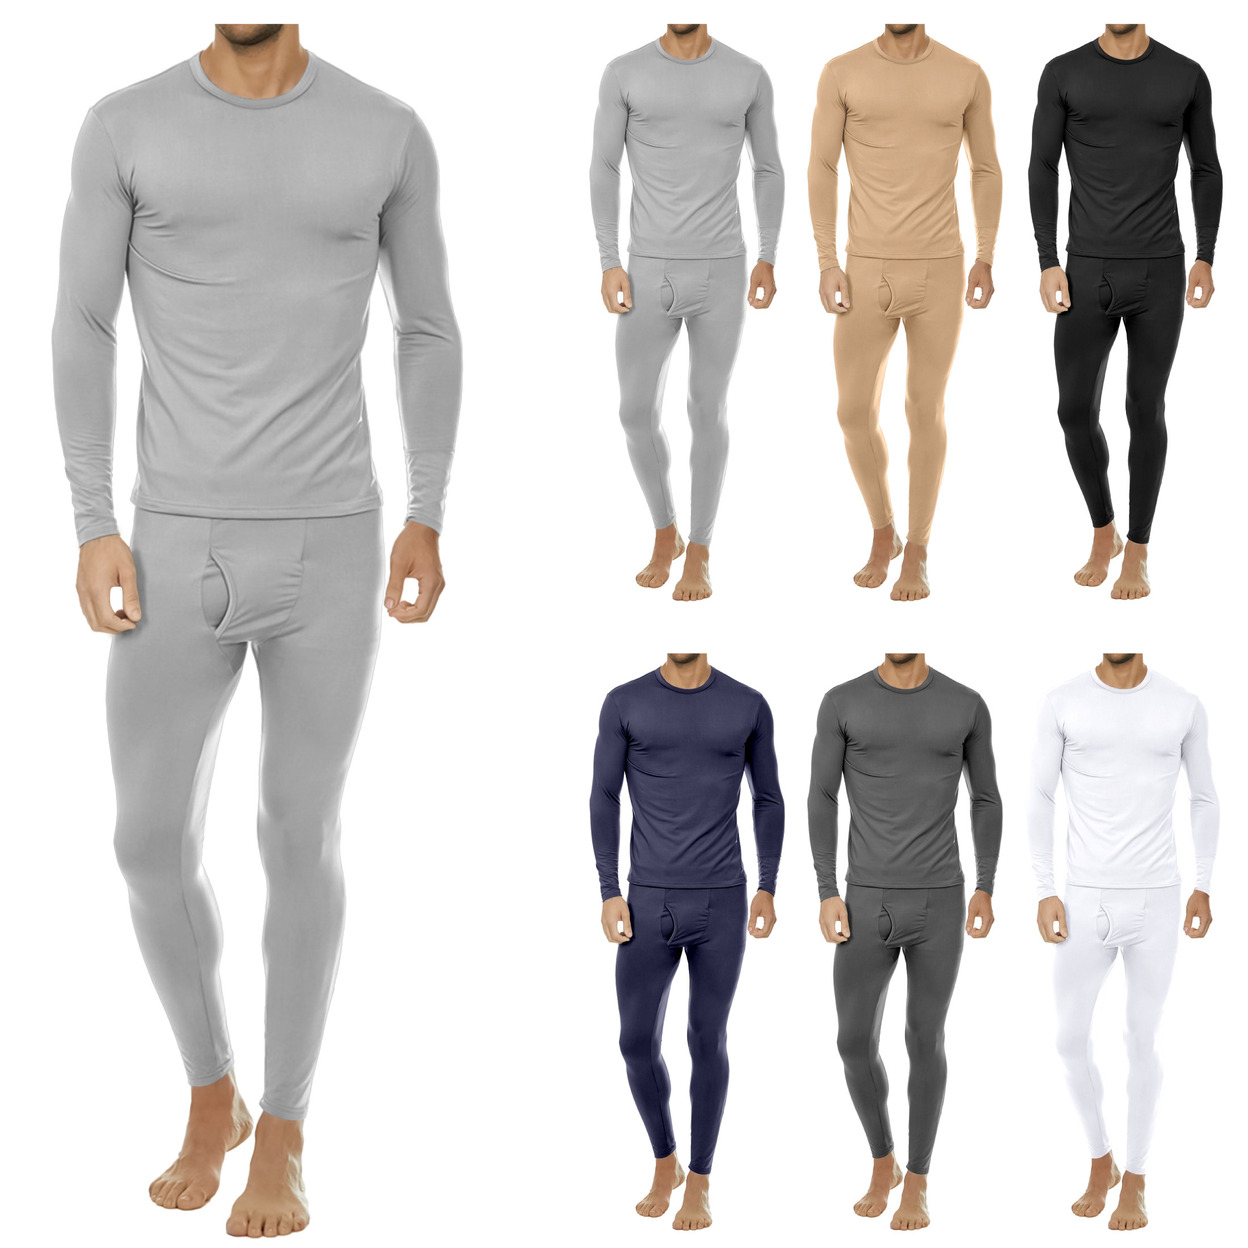 3-Sets: Men's Winter Warm Fleece Lined Thermal Underwear Set For Cold Weather - Xx-large